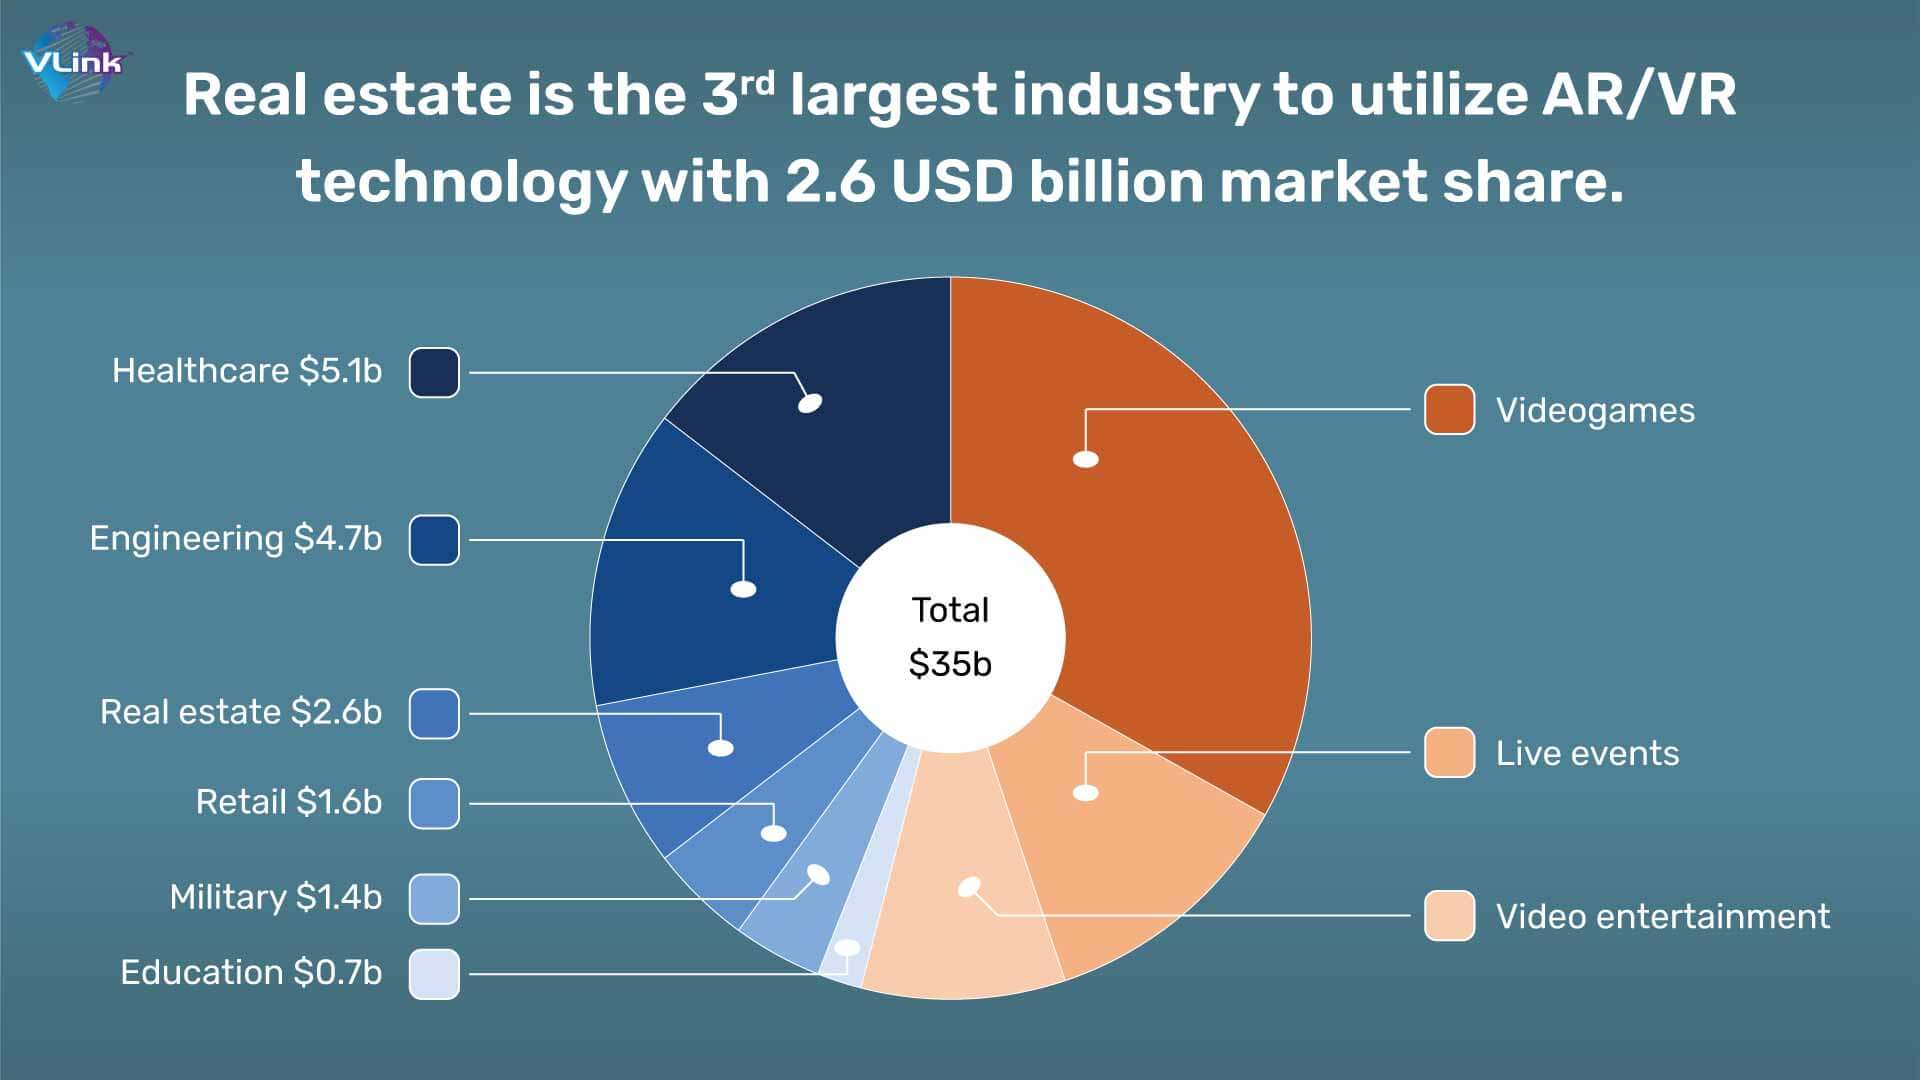 Real estate is the 3rd largest industry to utilize ARVR technology with 2.6 USD billion market share